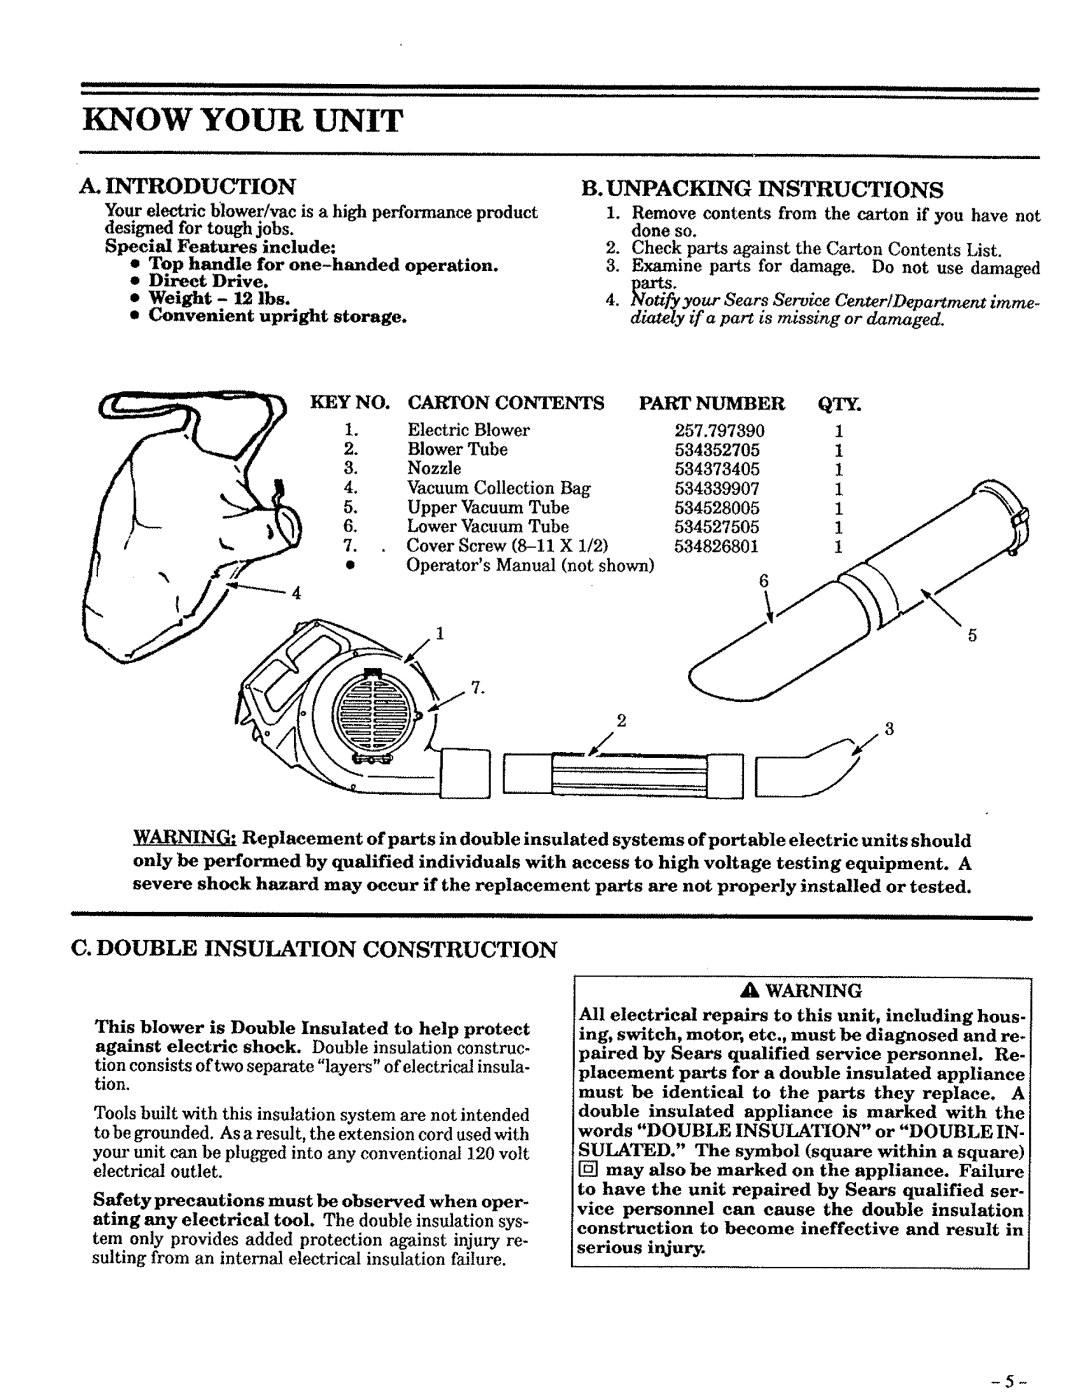 Craftsman 257.796362 Know Your Unit, B. Unpacking Instructions, C. Double Insulation Construction, xL, A.Fntrodug Ion 